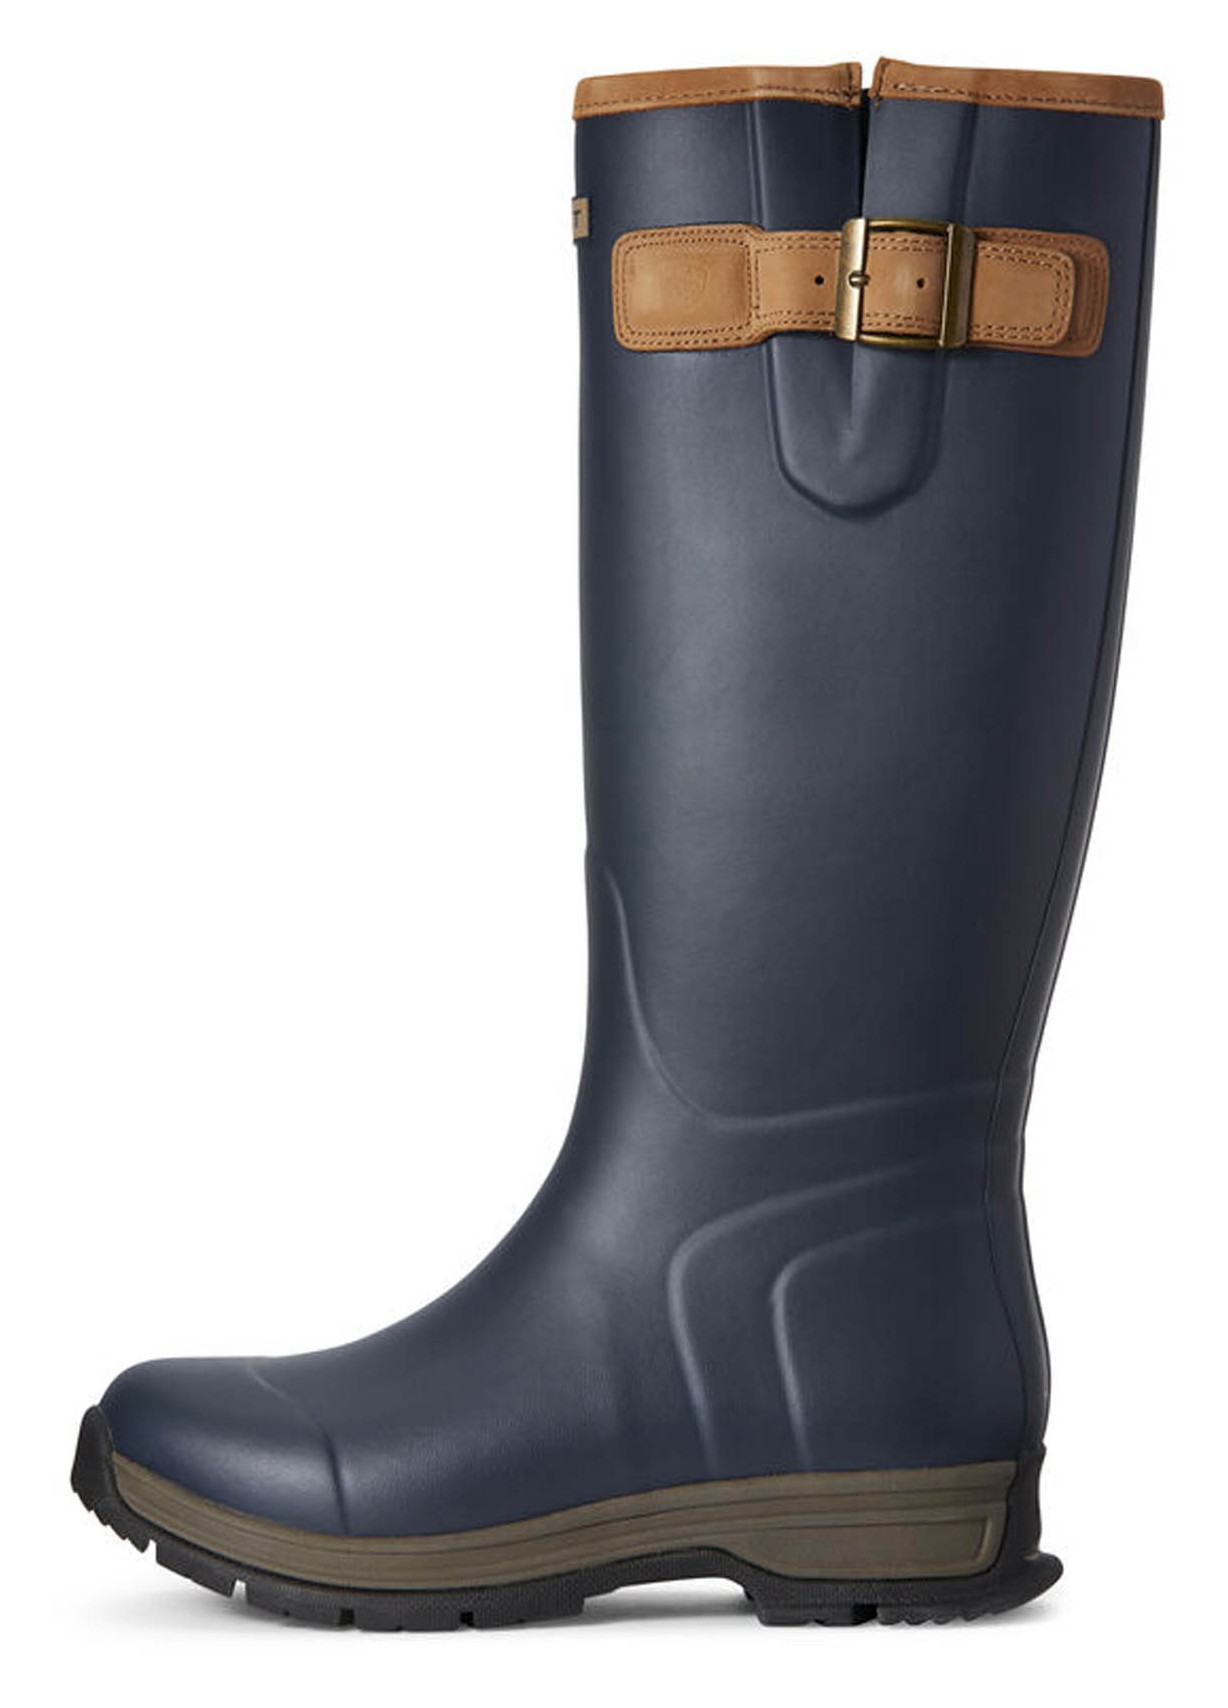 Ariat Riding Boots and Footwear Ariat Womens Burford Waterproof Rubber ...